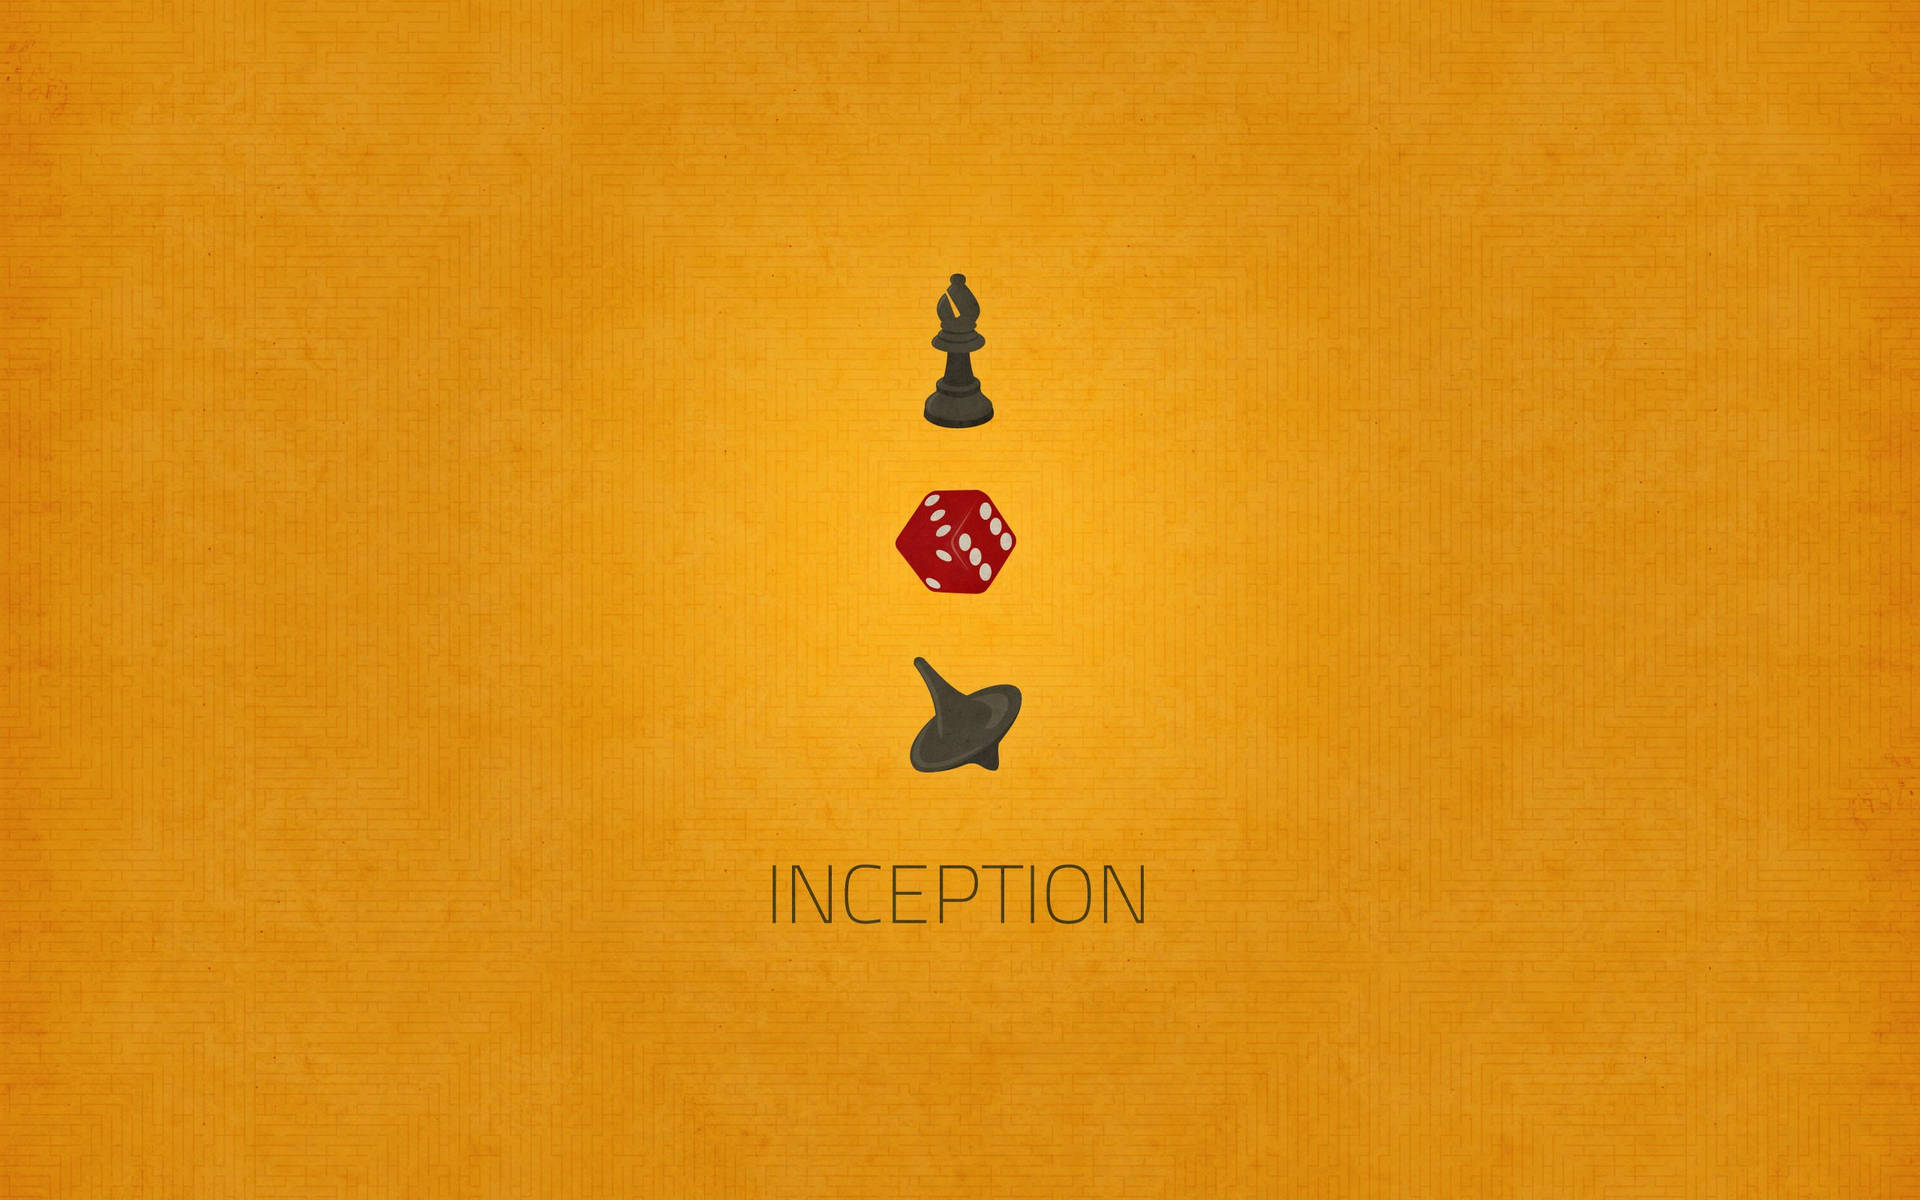 Inception Film Poster Background